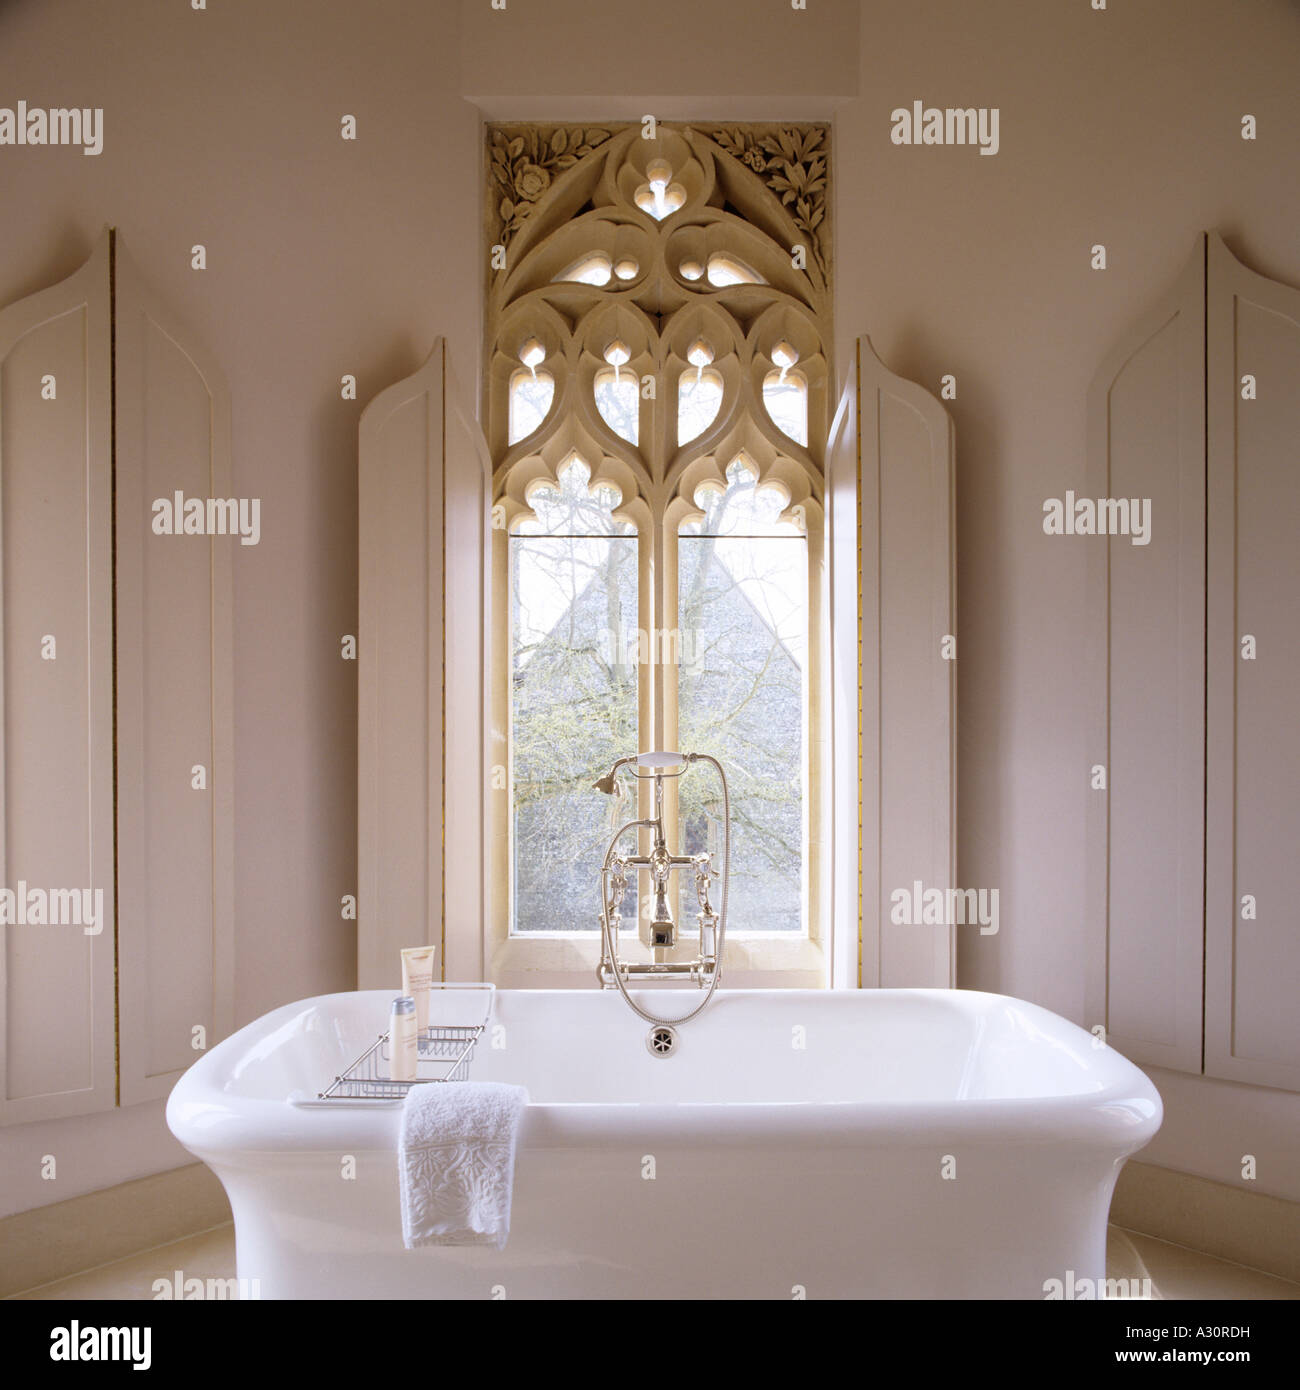 Freestanding bath in front of a large gothic window Stock Photo